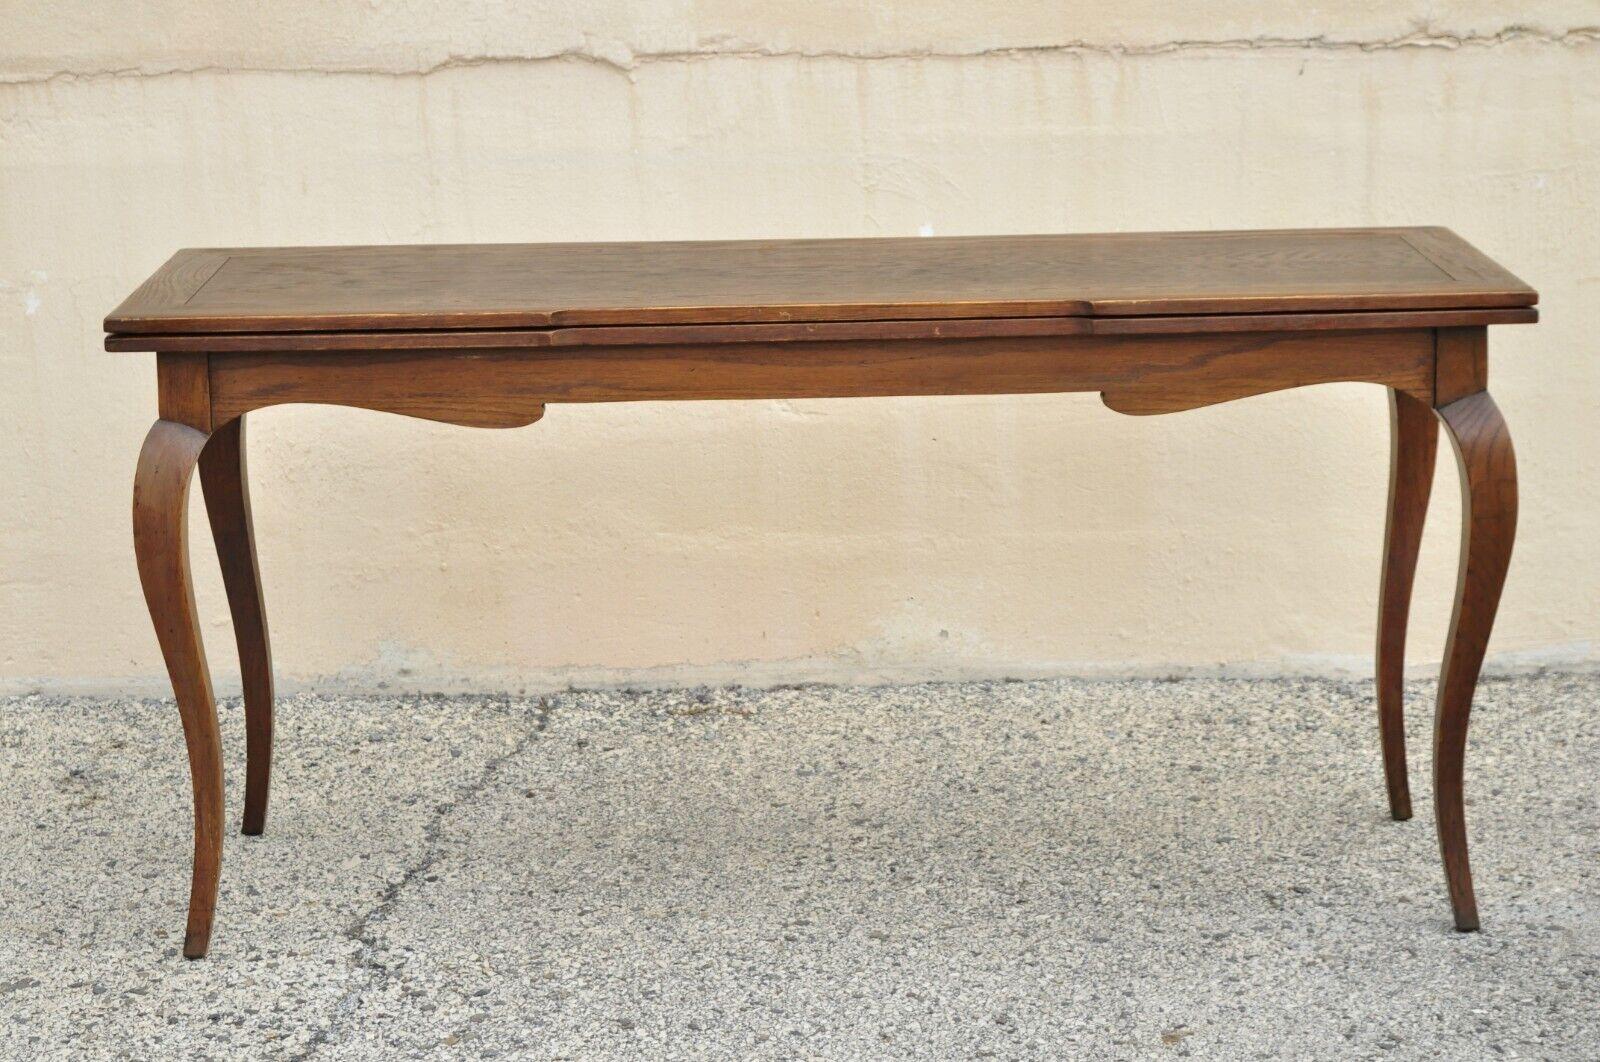 Vintage French Provincial Style Country Oak Wood Extension Console Game Table. Item features an Extension flip top, swing out butterfly legs, beautiful wood grain, cabriole legs, very nice vintage item, great style and form, maker unconfirmed,